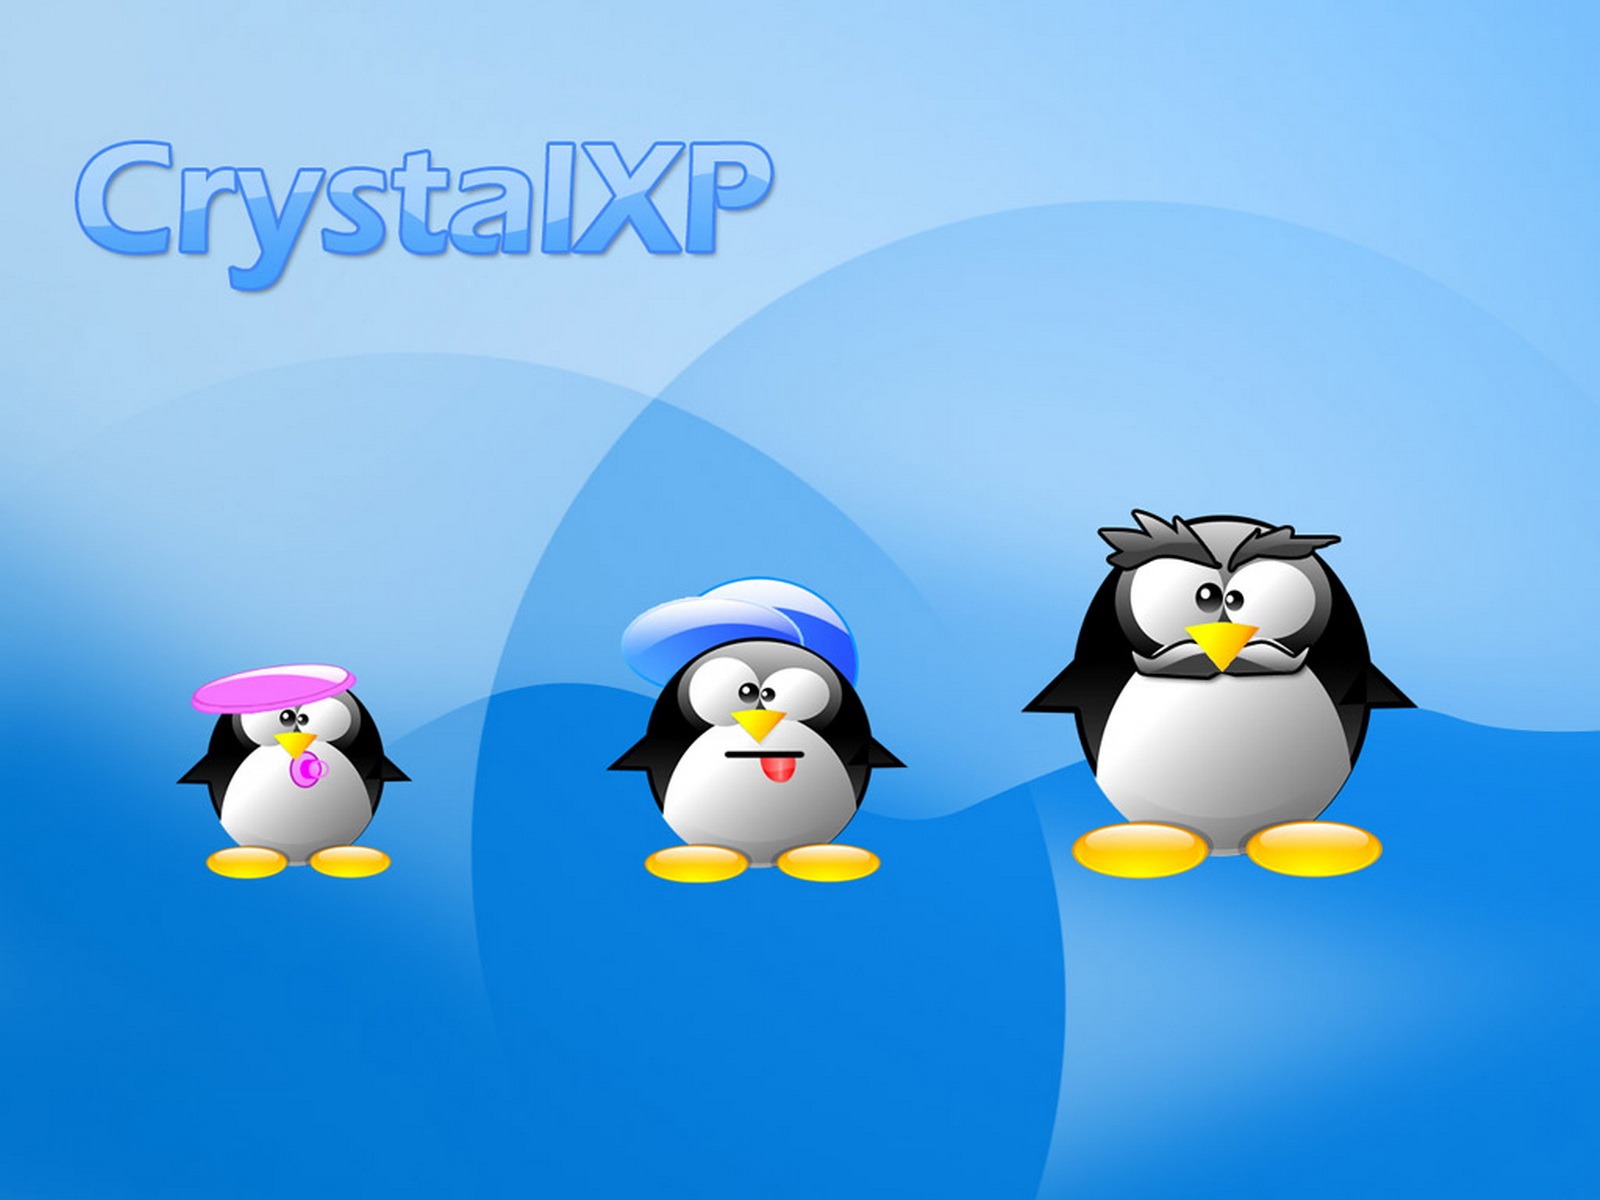 Linux tapety (2) #1 - 1600x1200